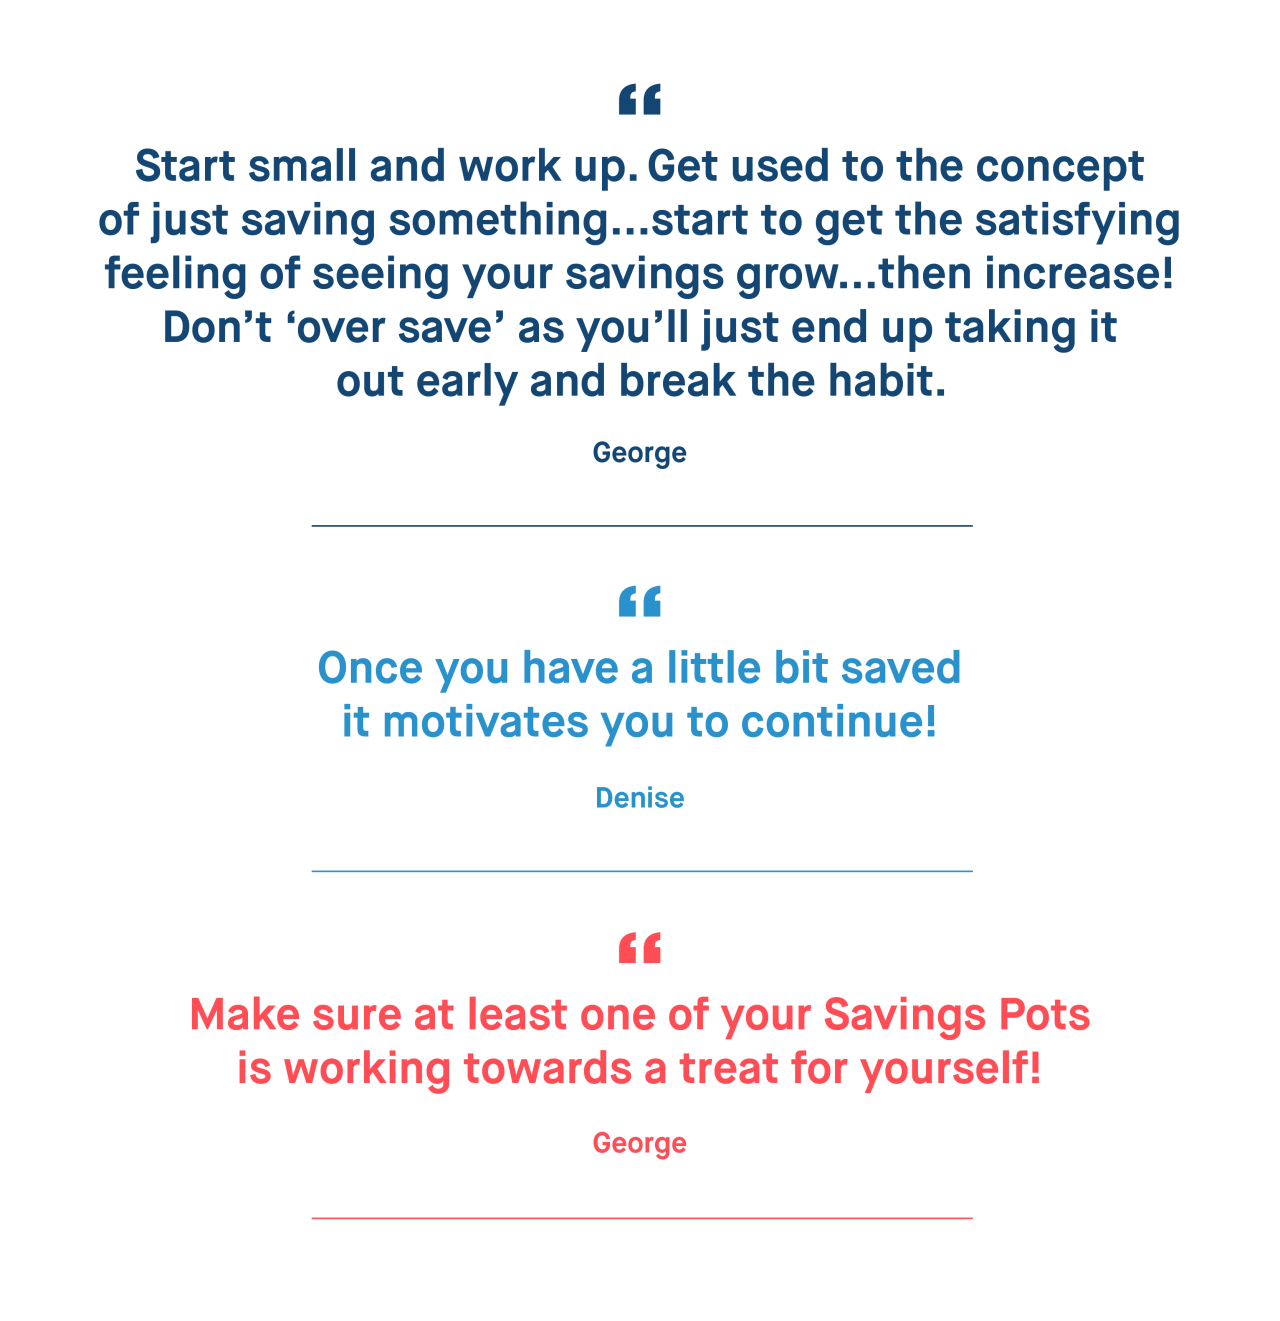 George – Start small and work up. Get used to the concept of just saving something...start to get the satisfying feeling of seeing your savings grow...then increase! Don’t ‘over save’ as you’ll just end up taking it out early and break the habit. 

Denise – Once you have a little bit saved it motivates you to continue!

George – Make sure at least one of your Savings Pots is working towards a treat for yourself!
